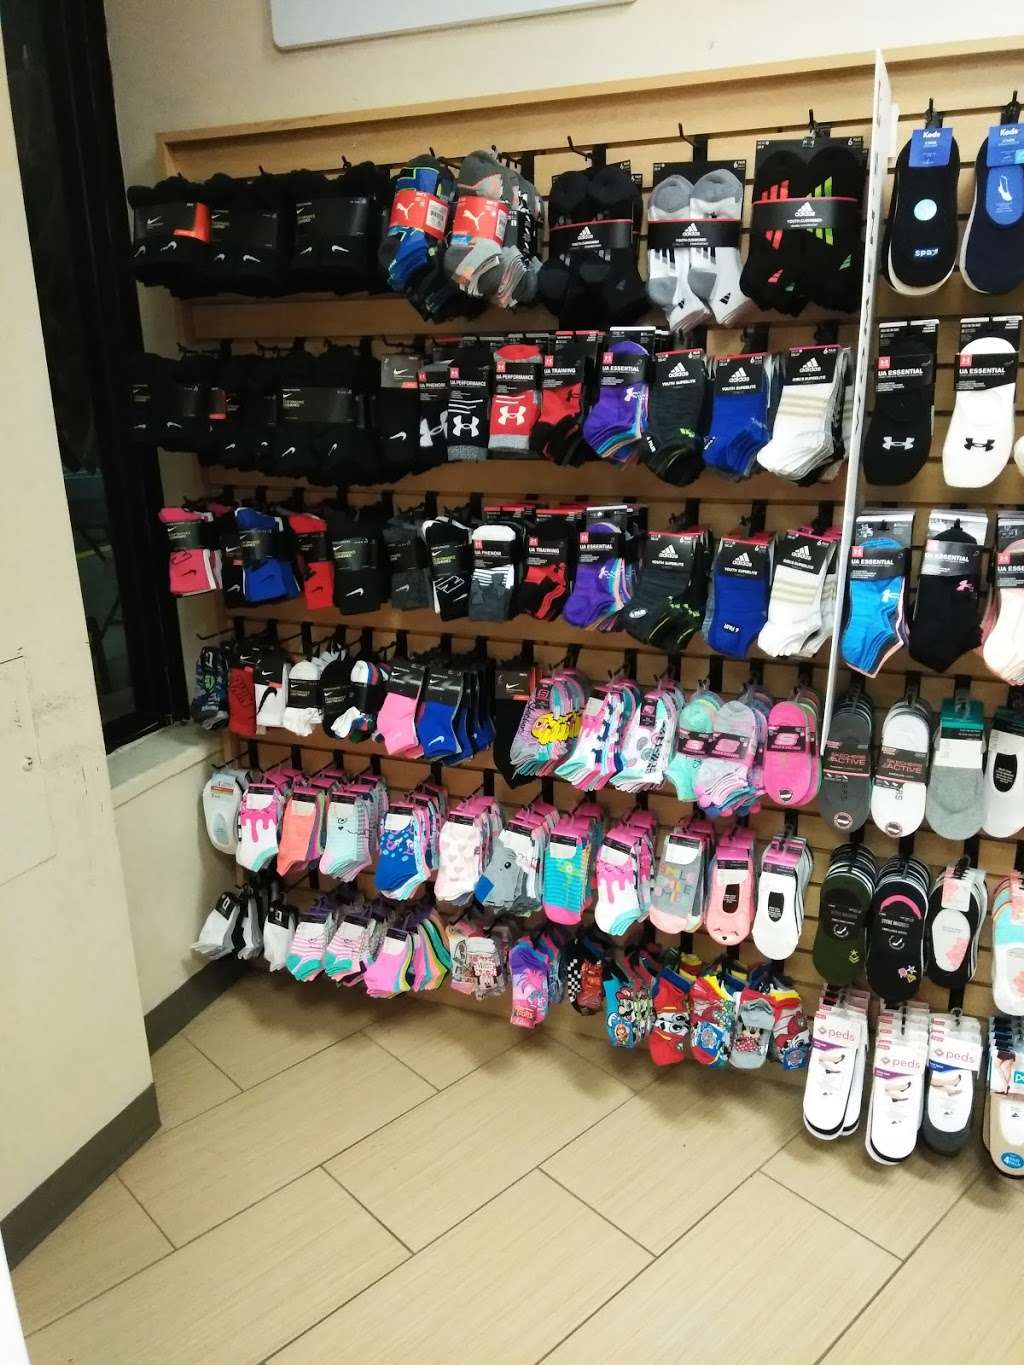 Famous Footwear | 13513 Connecticut Ave, Silver Spring, MD 20906 | Phone: (301) 692-2000